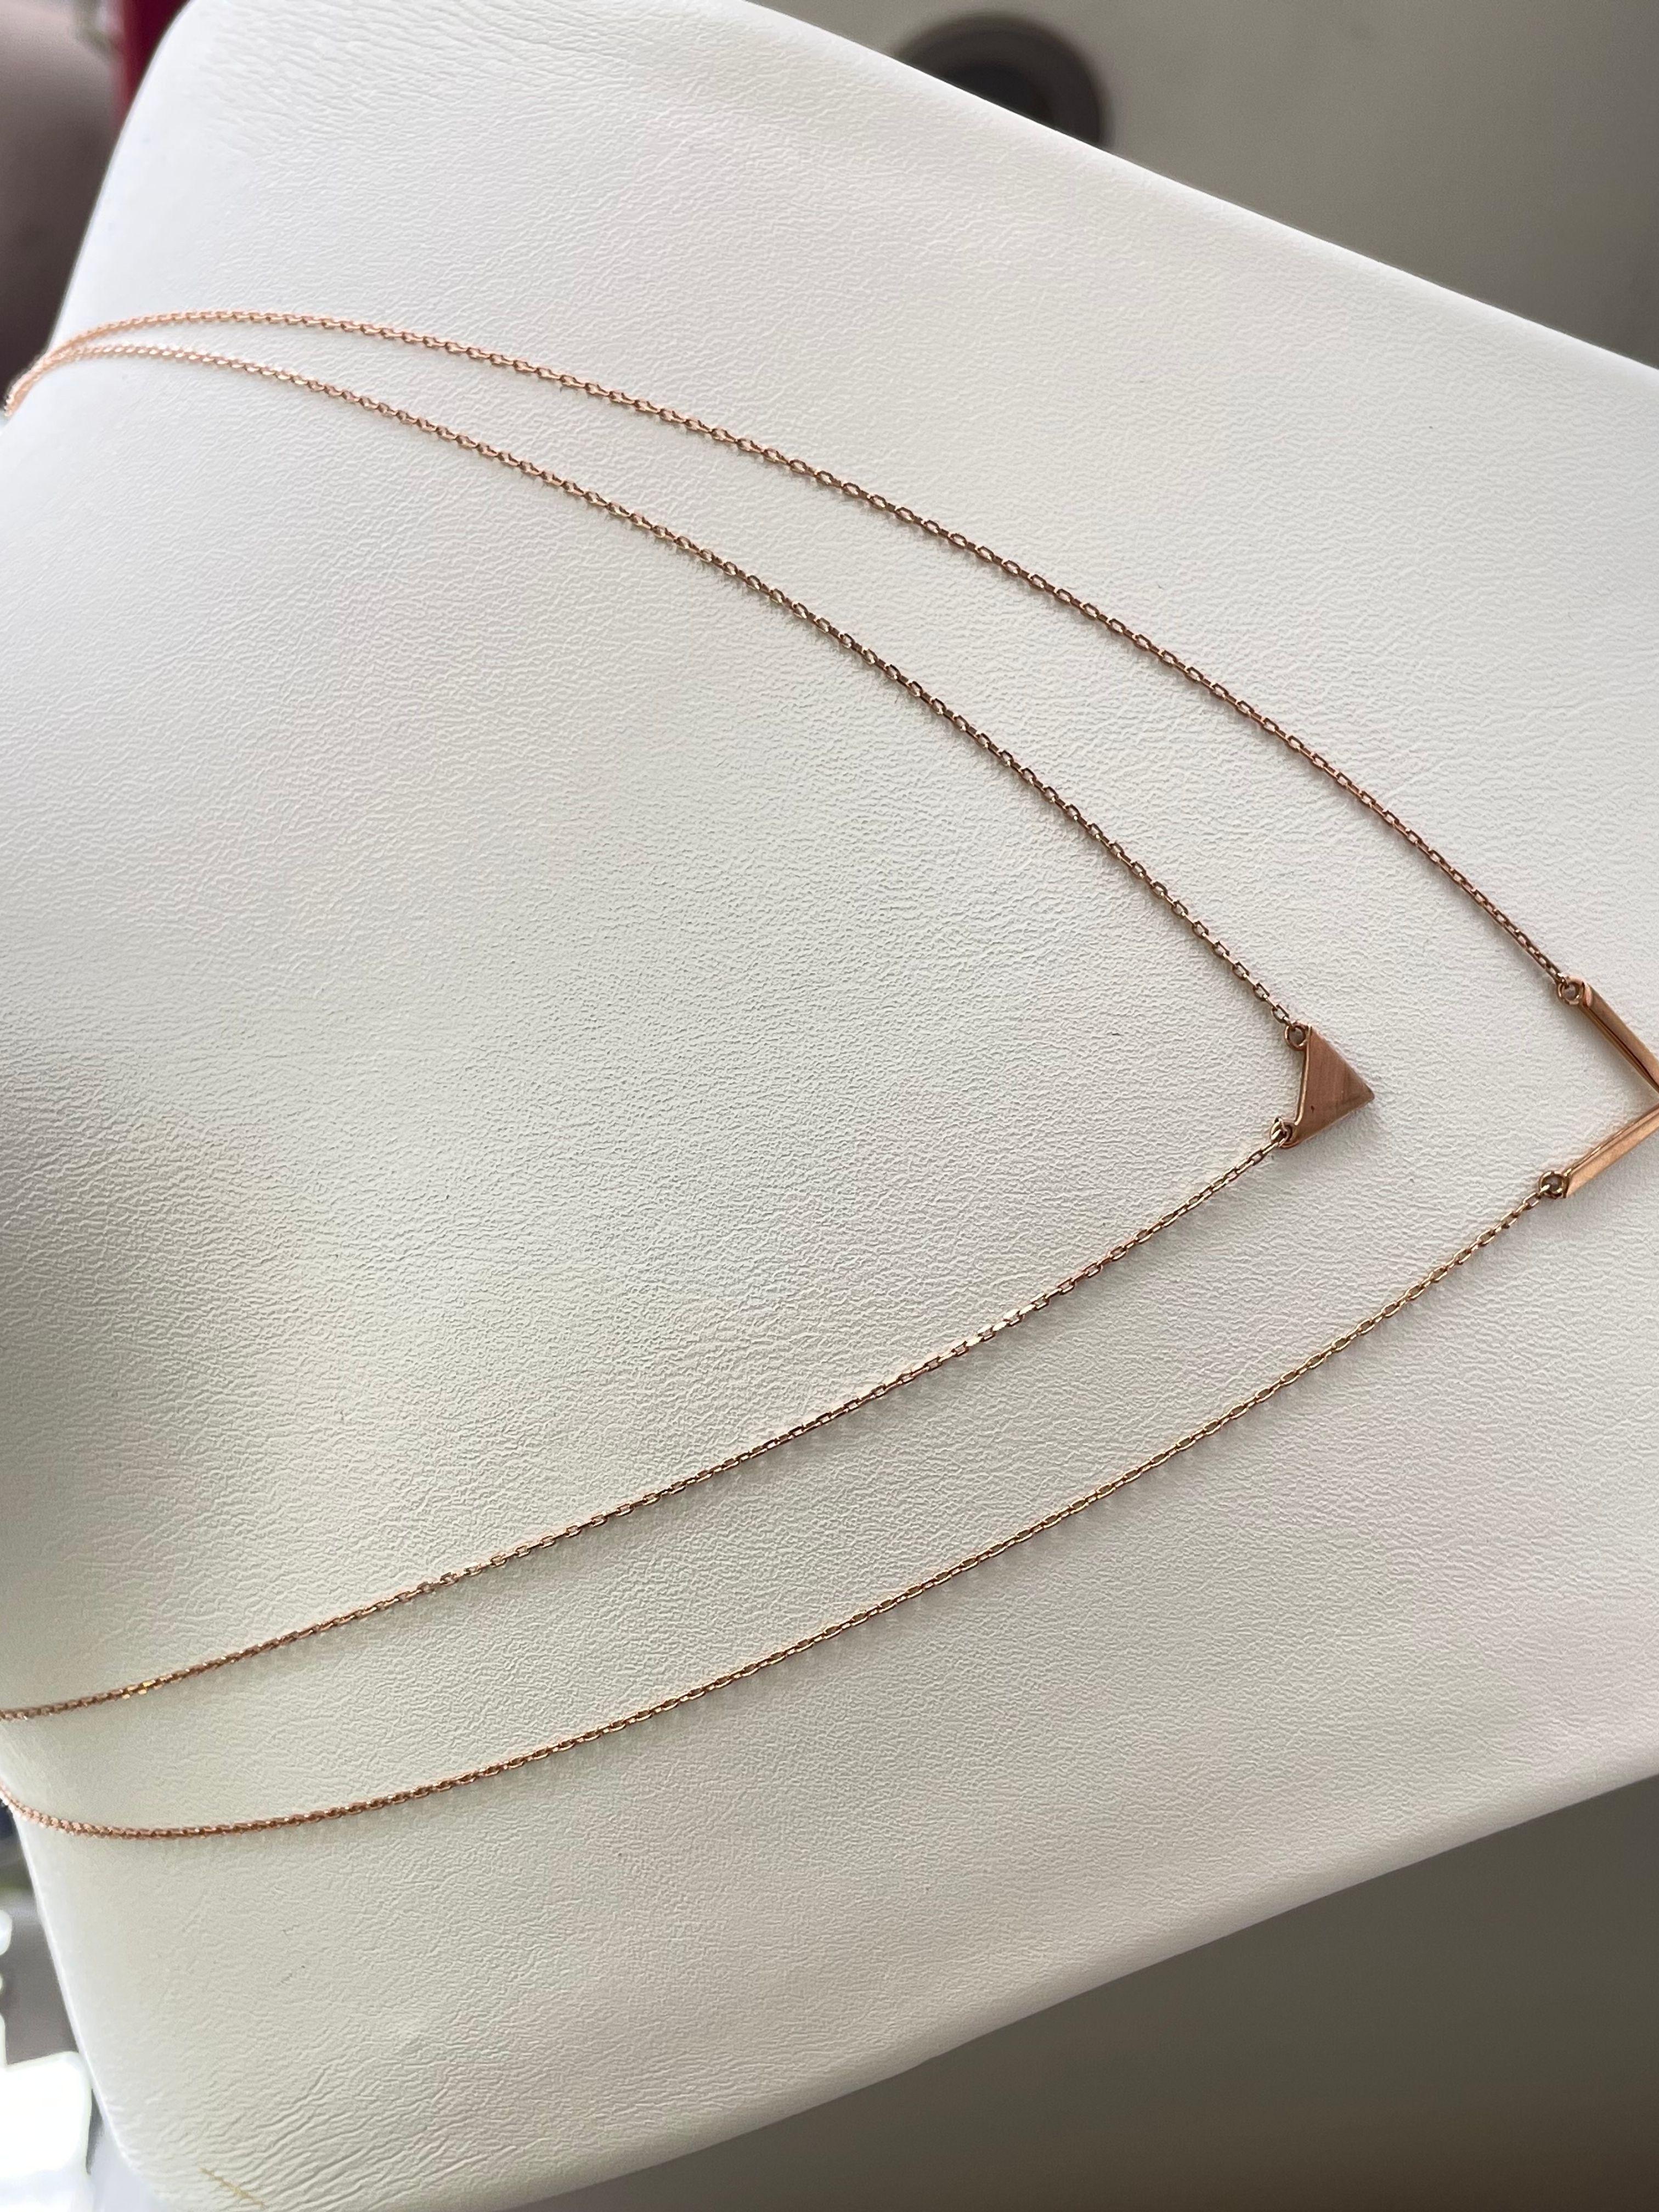 Rose Gold Necklace Set, Errow Necklaces set, 14K Rose Gold Delicate Necklace set In New Condition For Sale In Ramat Gan, IL